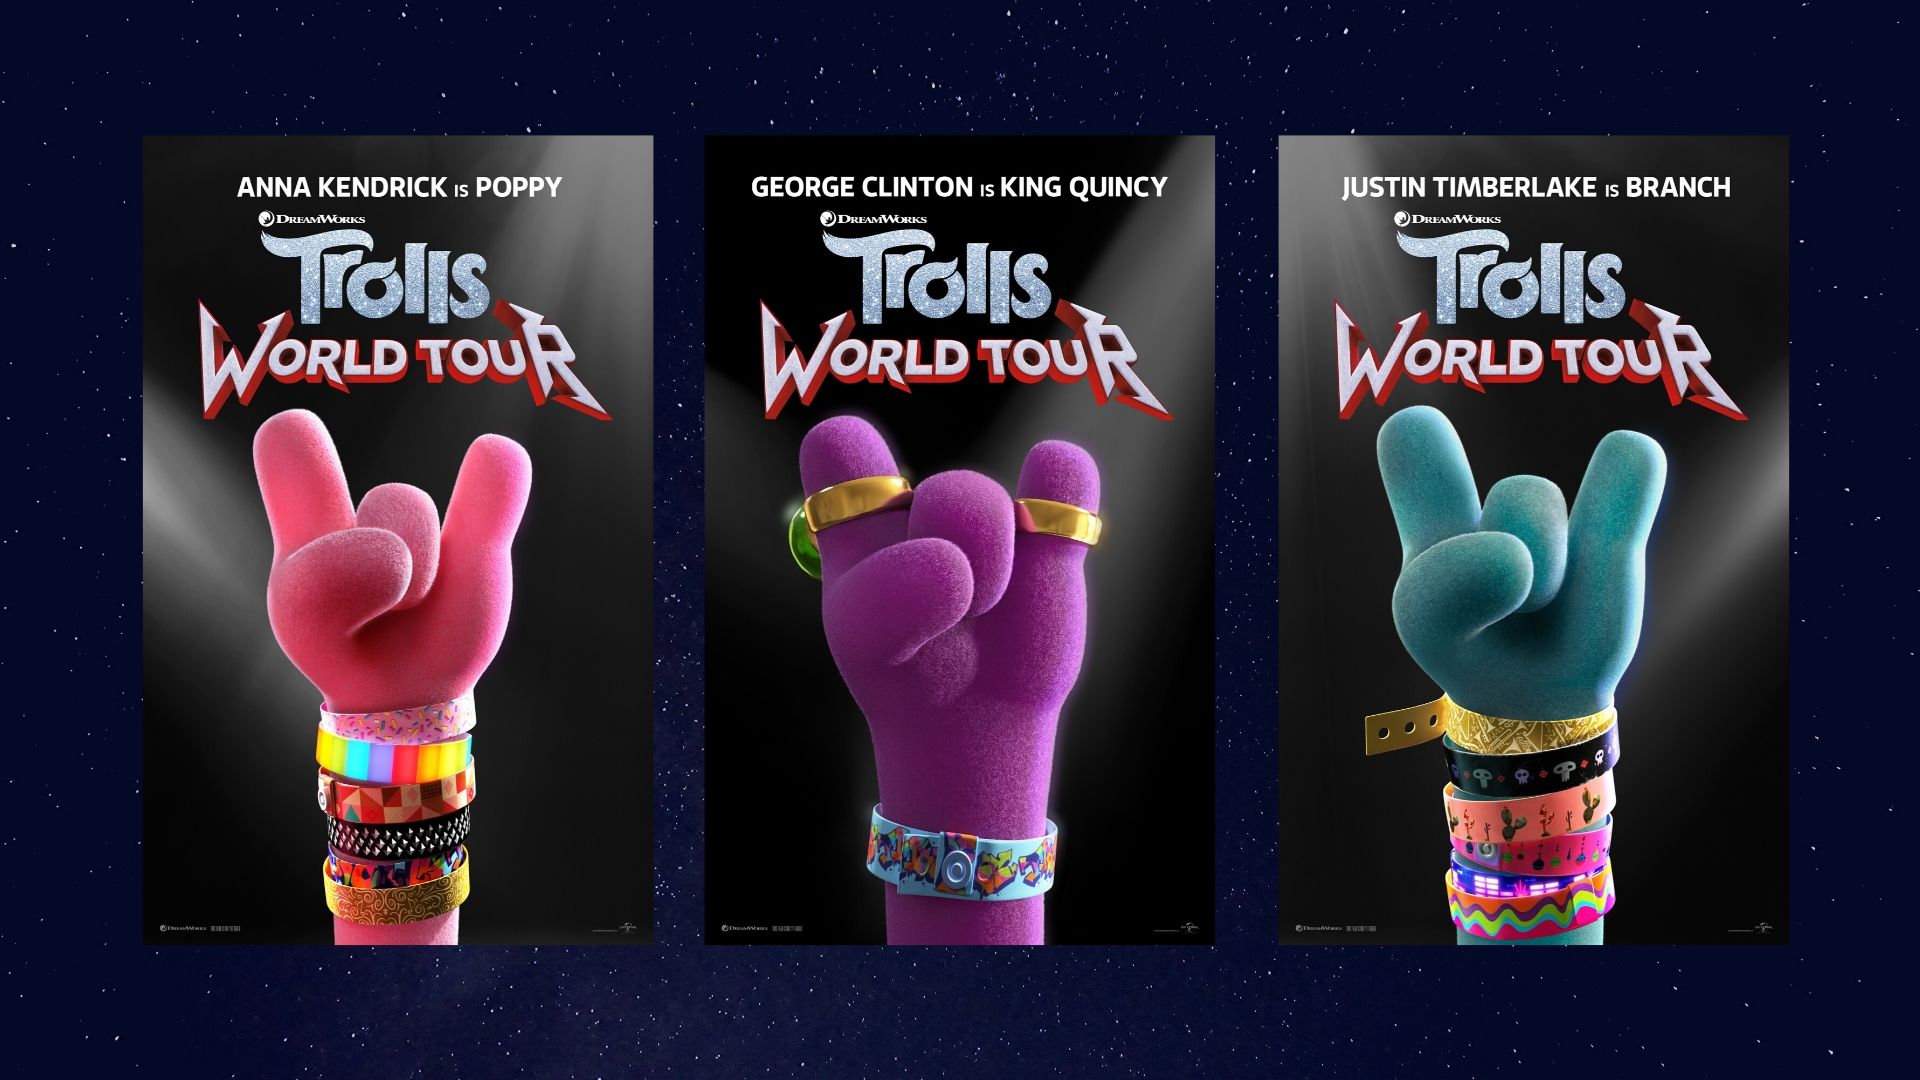 Hollywood’s Movie Review: Trolls World Tour